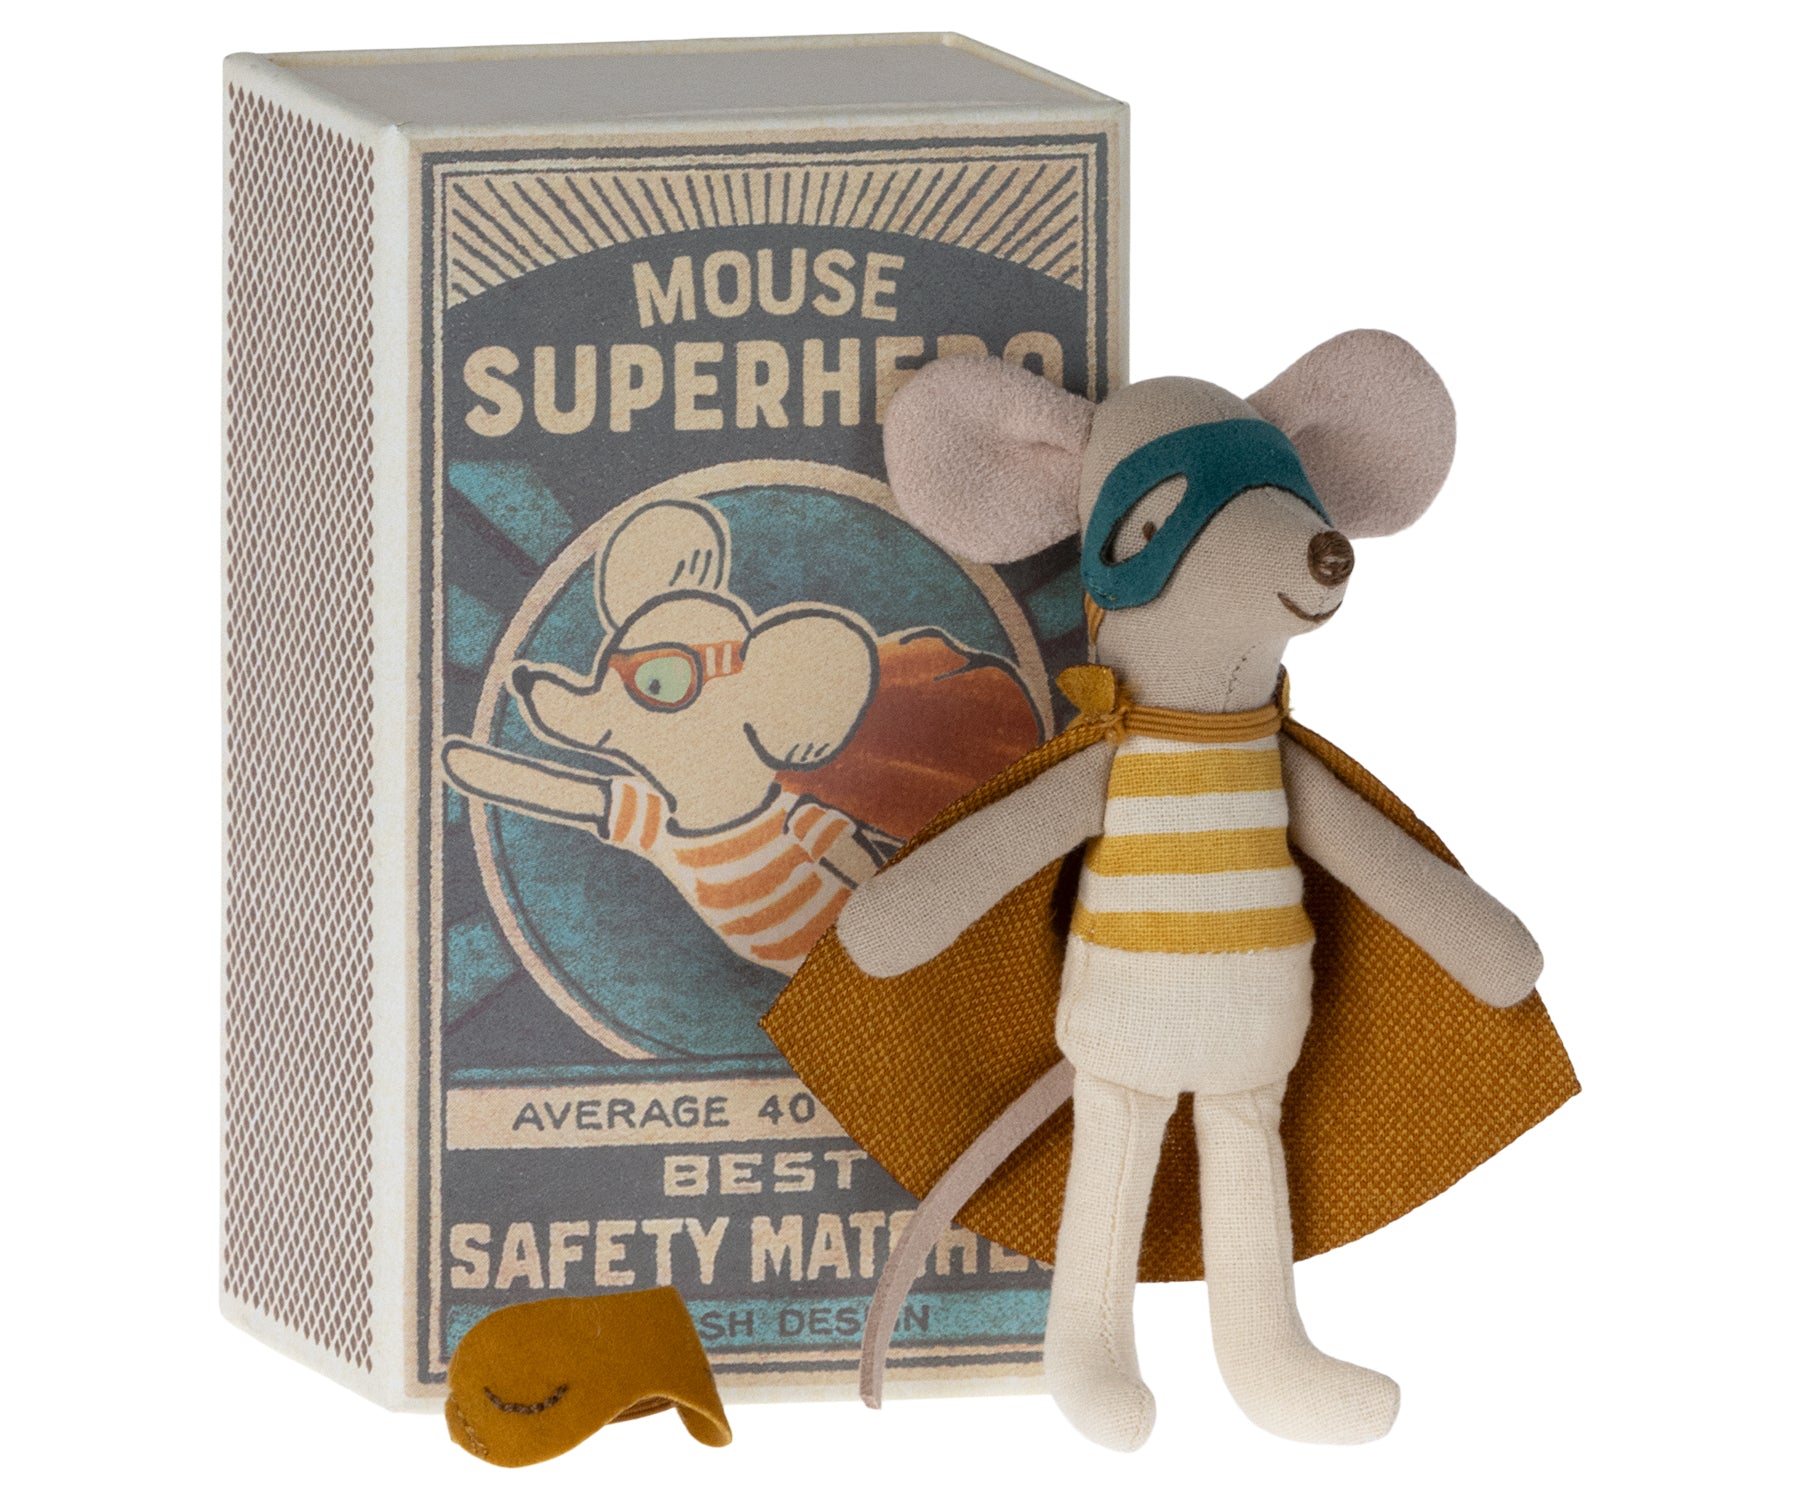 Maileg Superhero Mouse in Matchbox – Little Brother